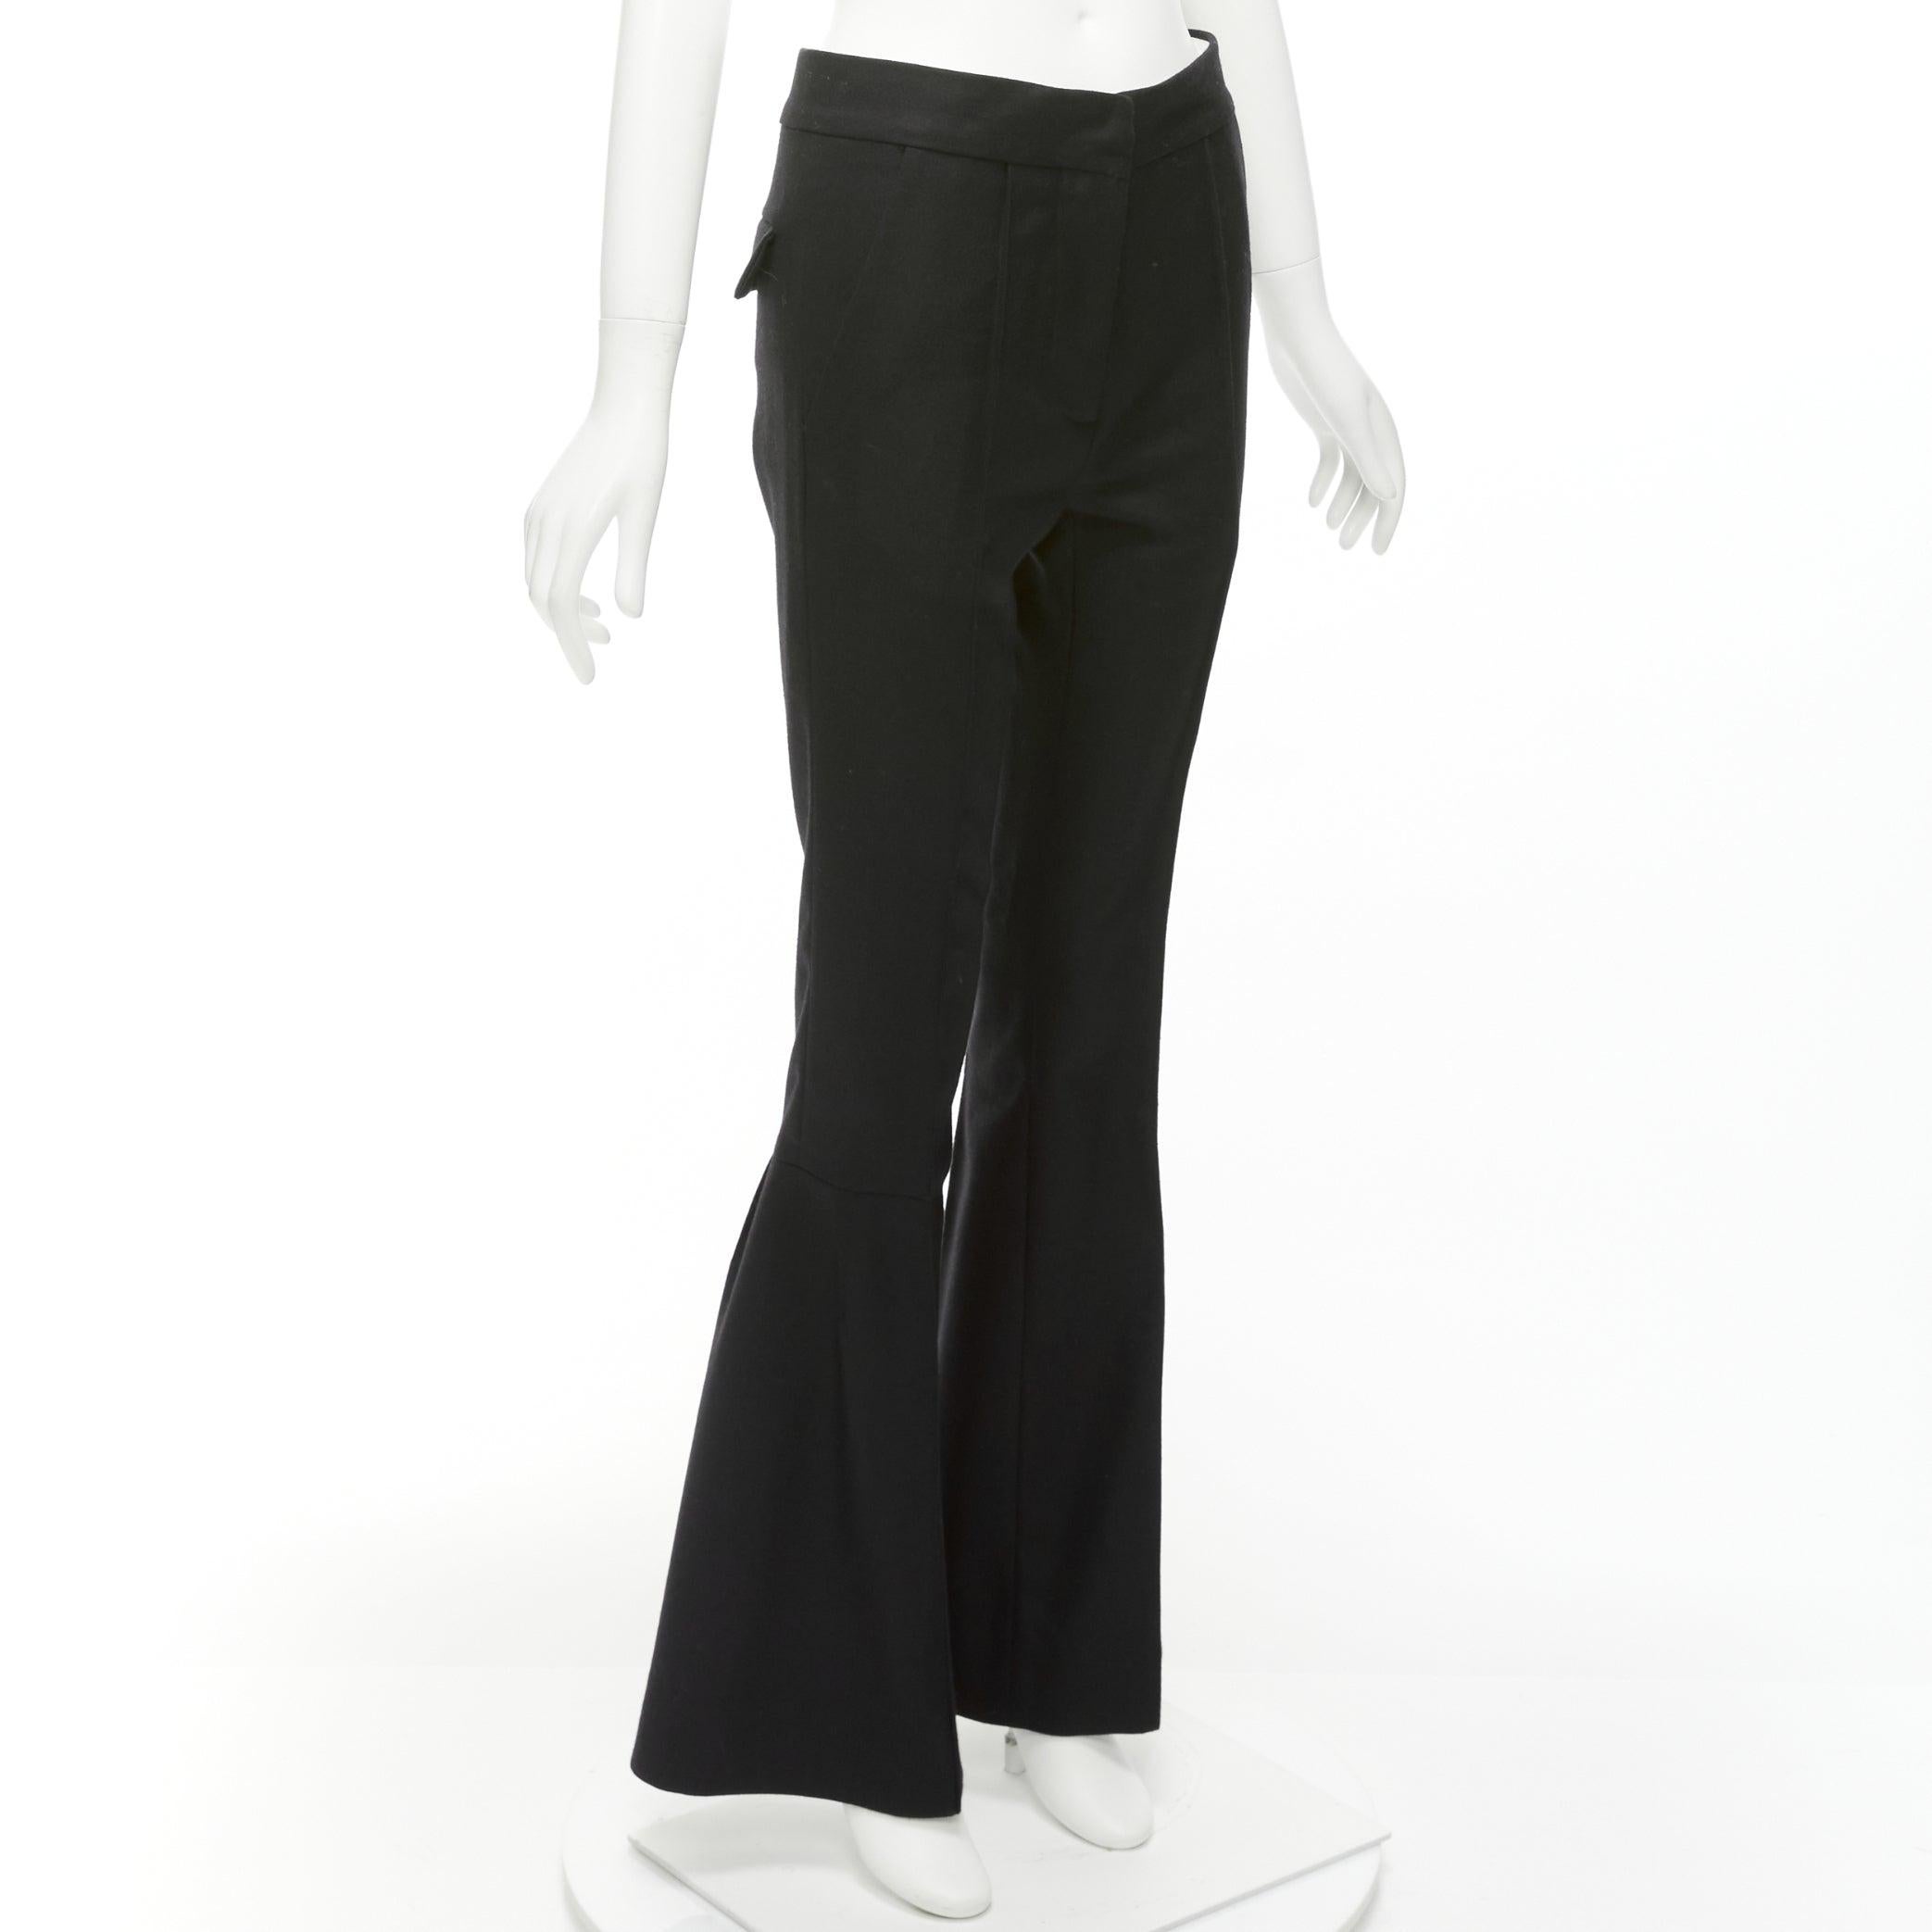 MARNI black wool twill mid waist flared dress pants IT38 XS
Reference: NKLL/A00198
Brand: Marni
Material: Wool
Color: Black
Pattern: Solid
Closure: Zip Fly
Lining: White Fabric
Extra Details: Back flap pockets.
Made in: Italy

CONDITION:
Condition: